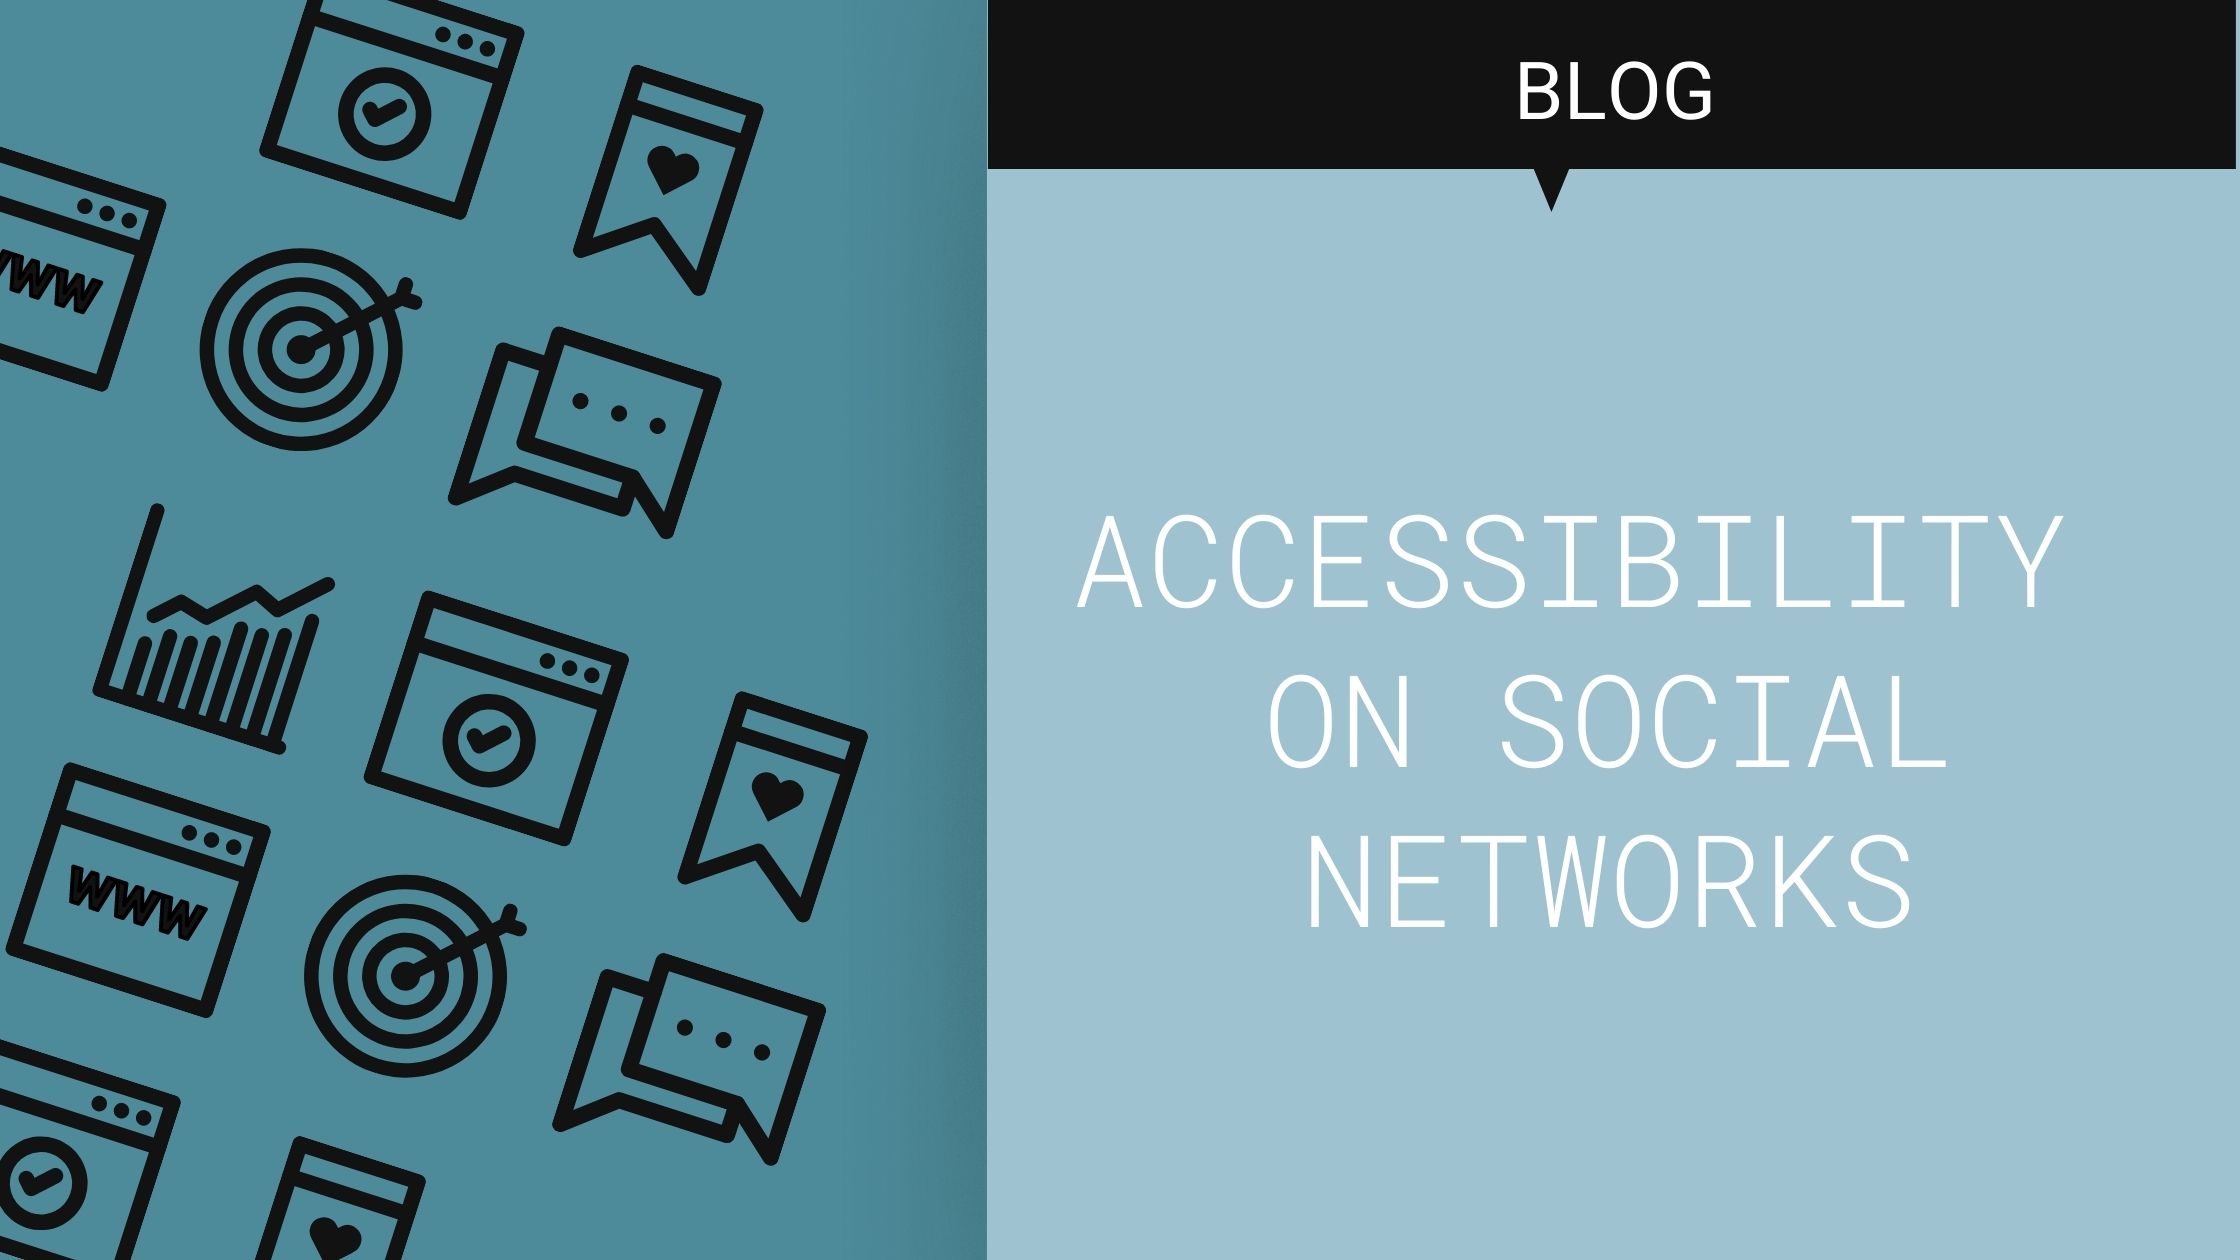 Accessibility on social networks